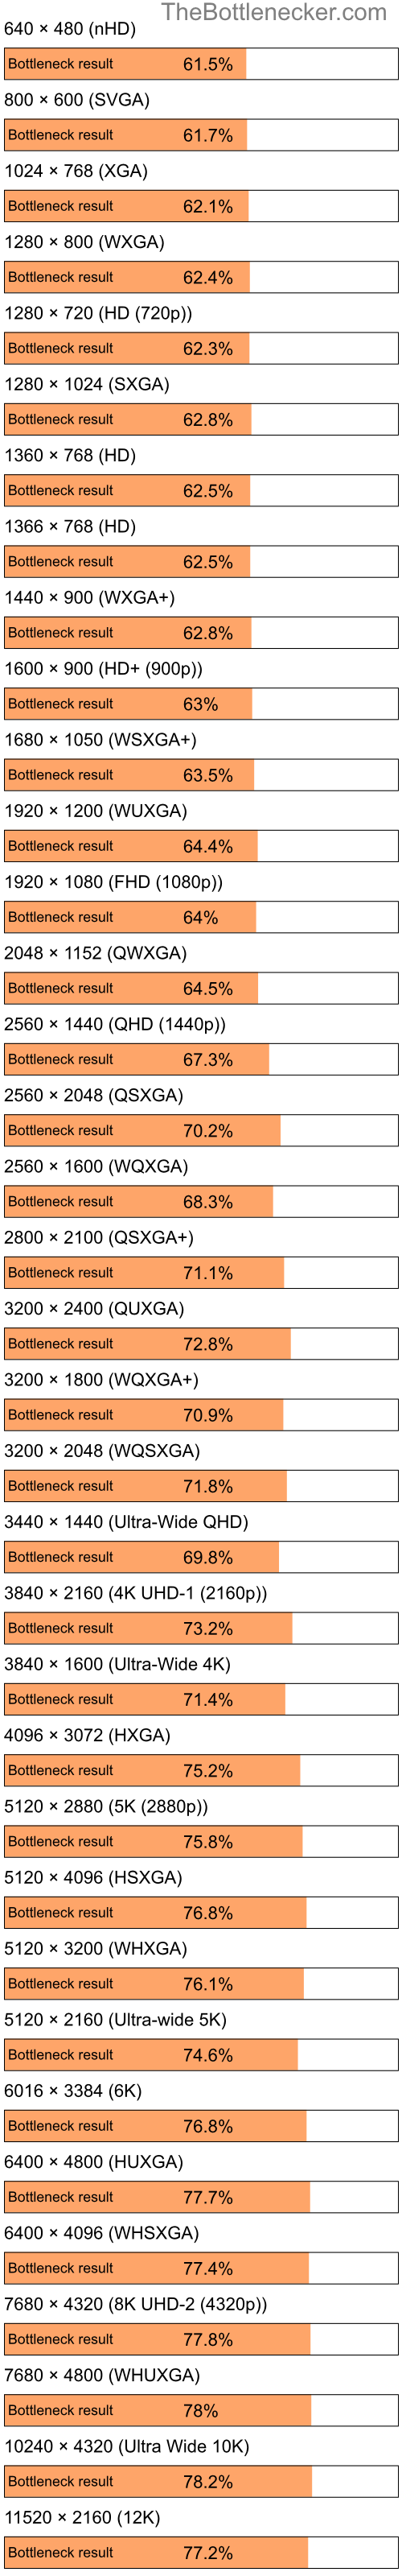 Bottleneck results by resolution for Intel Celeron and NVIDIA GeForce 210 in7 Days to Die